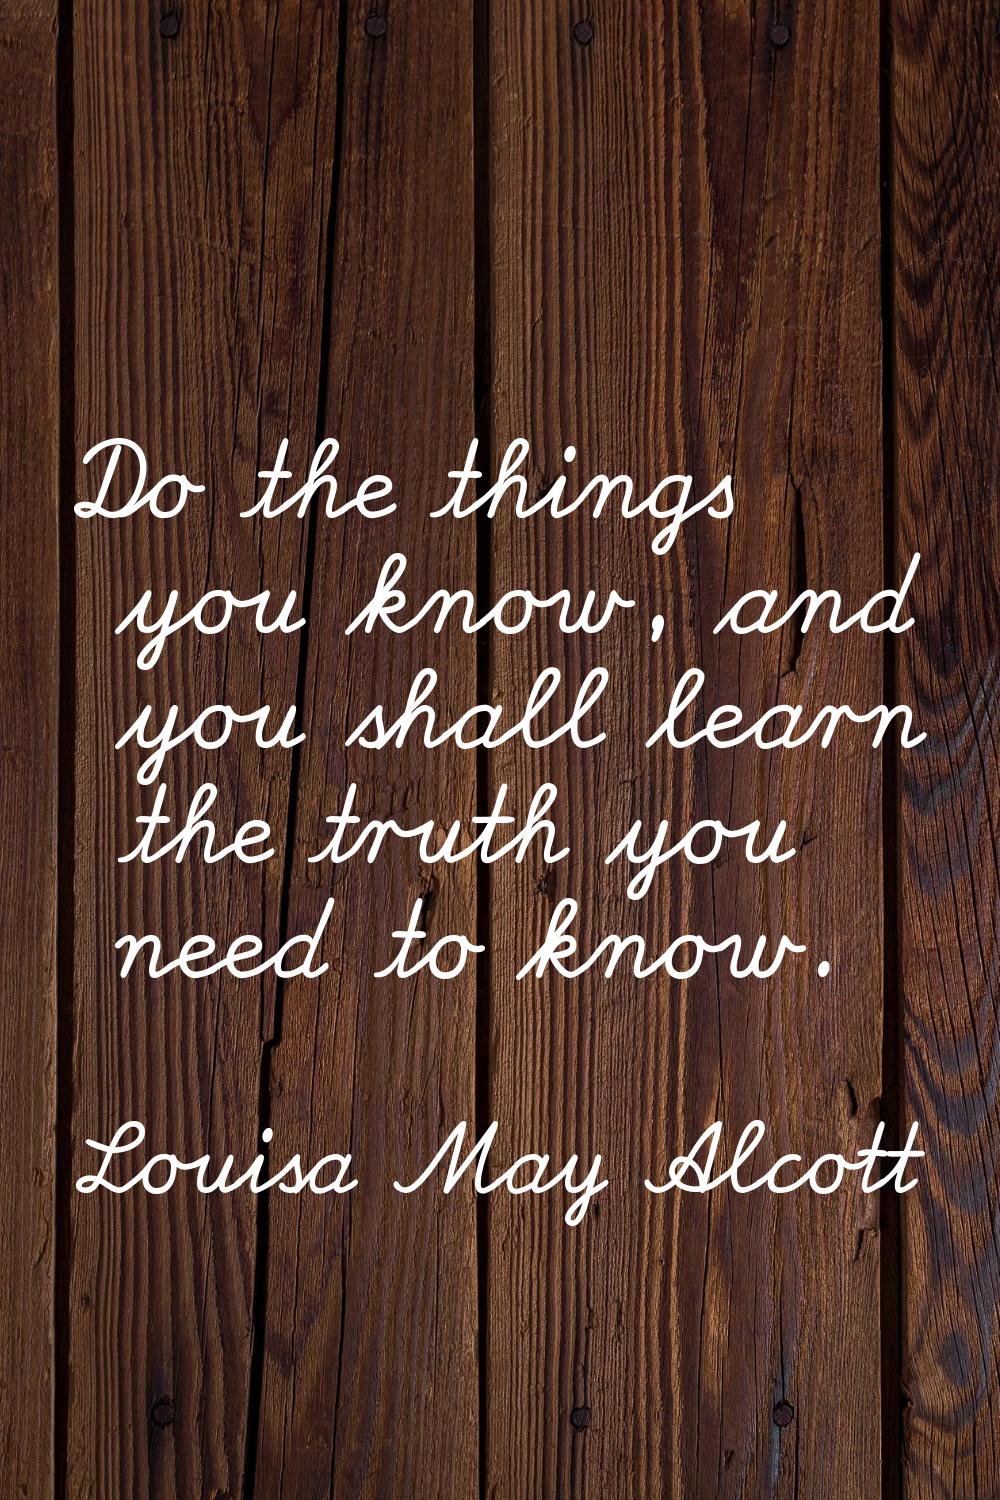 Do the things you know, and you shall learn the truth you need to know.